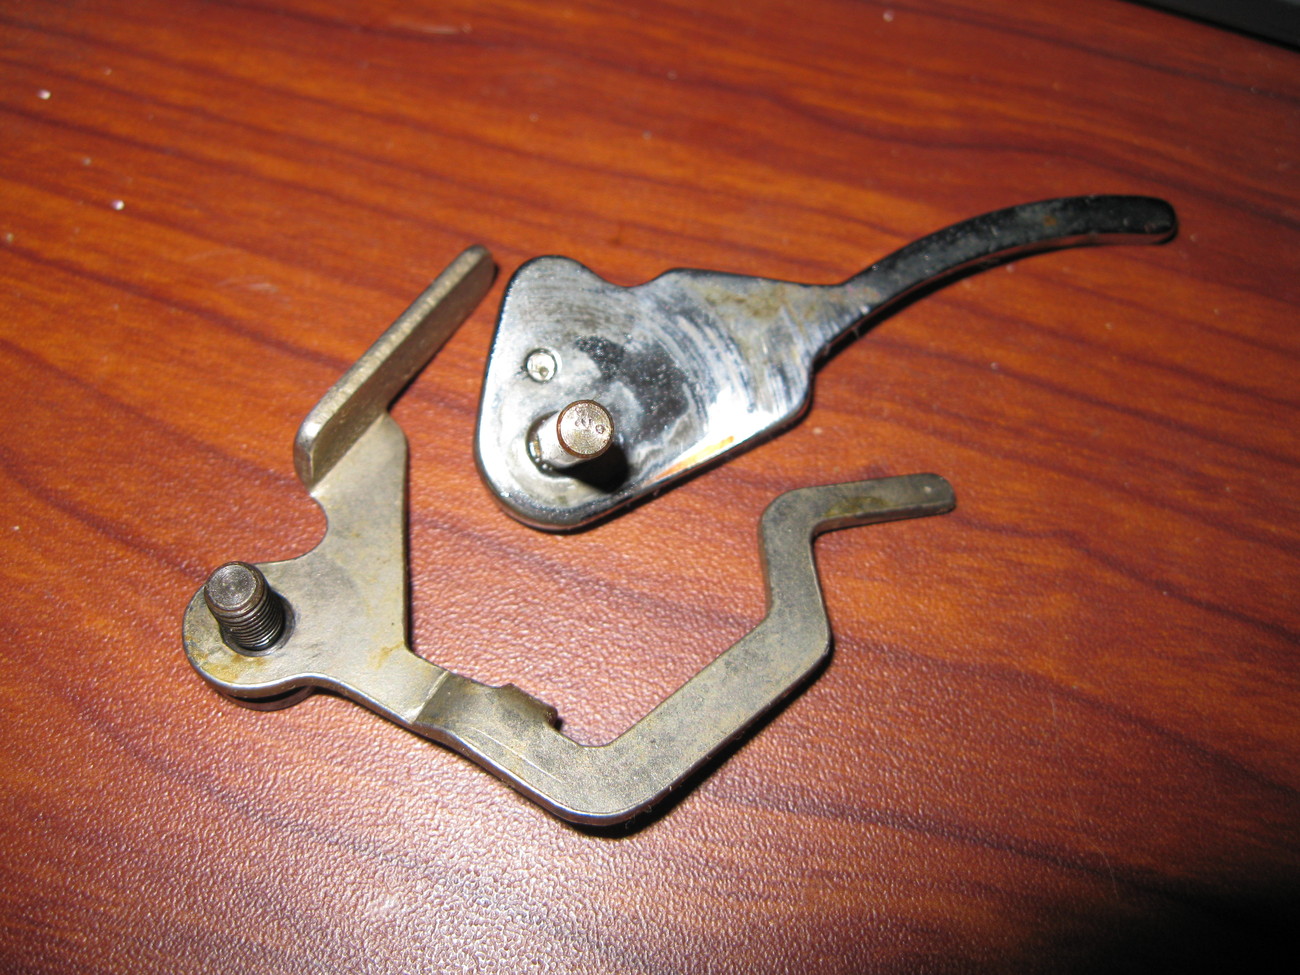 Kenmore 148.1217 Thumb Lift Lever & Tension Linkage Used Works w/ Screw - $10.00